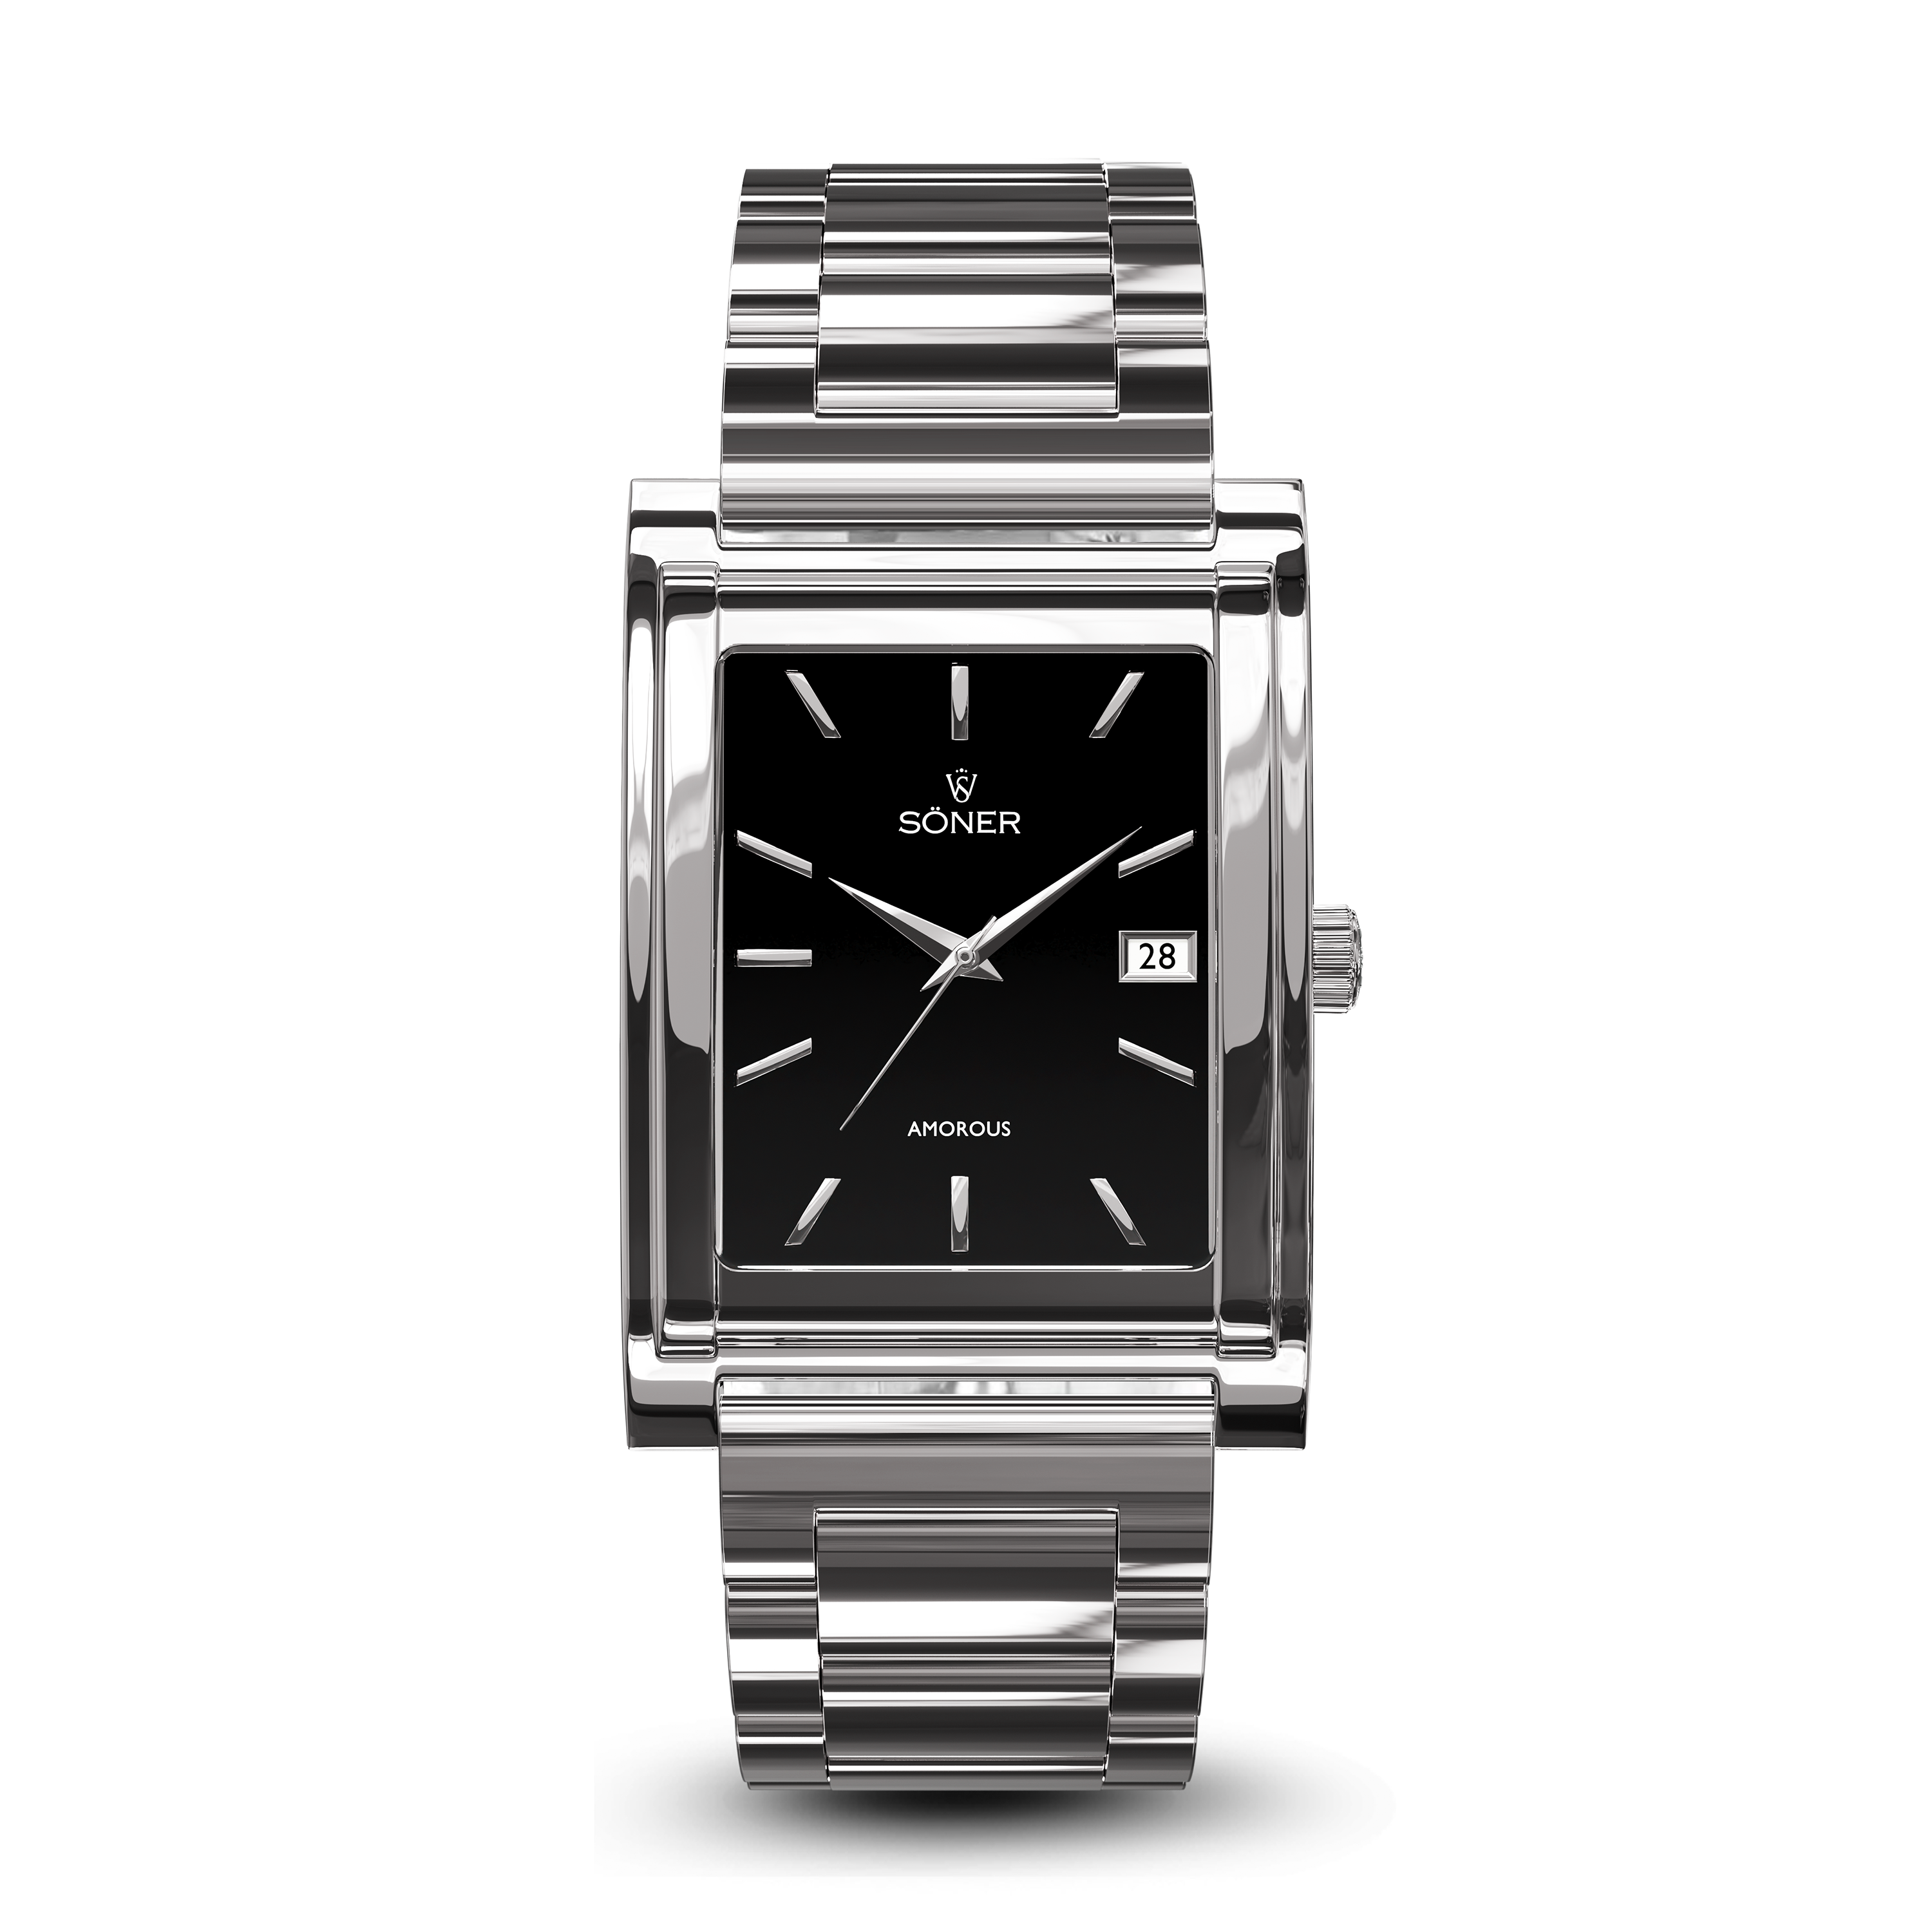 Square automatic watch, Amorous Barcelona with black dial - steel bracelet front view